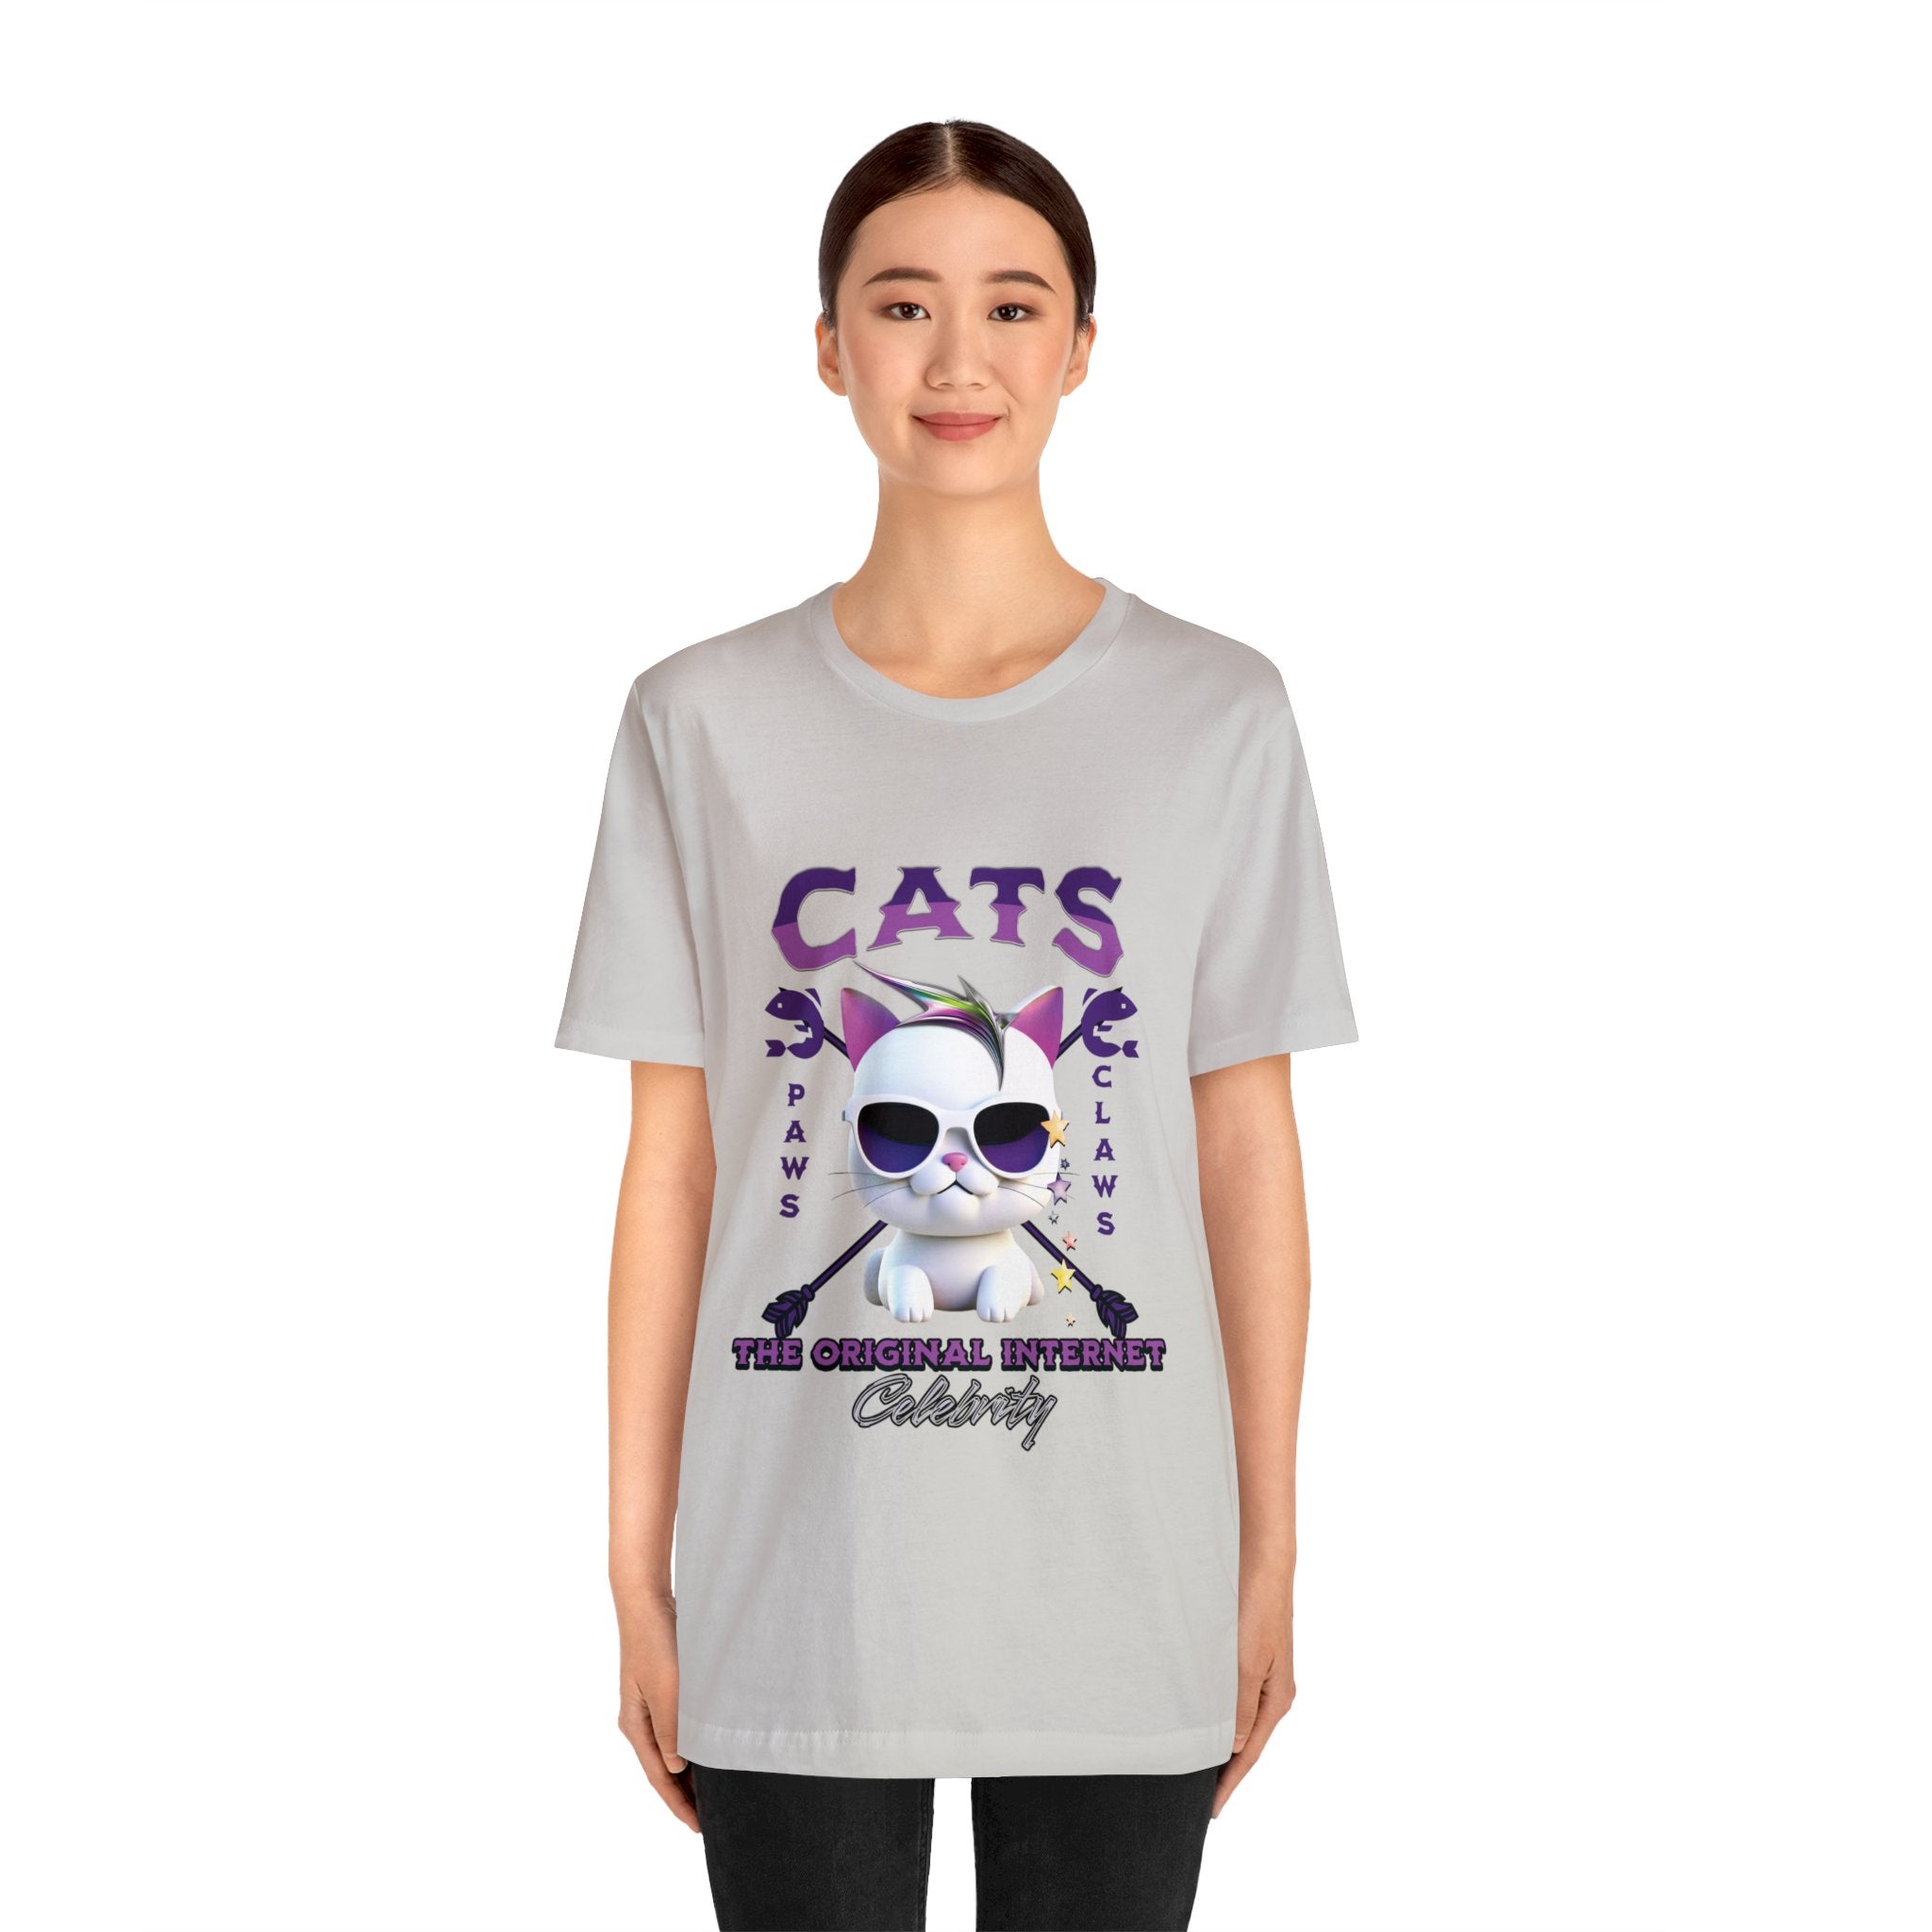 "Cats: The Original Internet Celebrity" Unisex 3 D Cat Tee - Pawsitively Iconic! - MTL Dynamic StylesT-Shirt